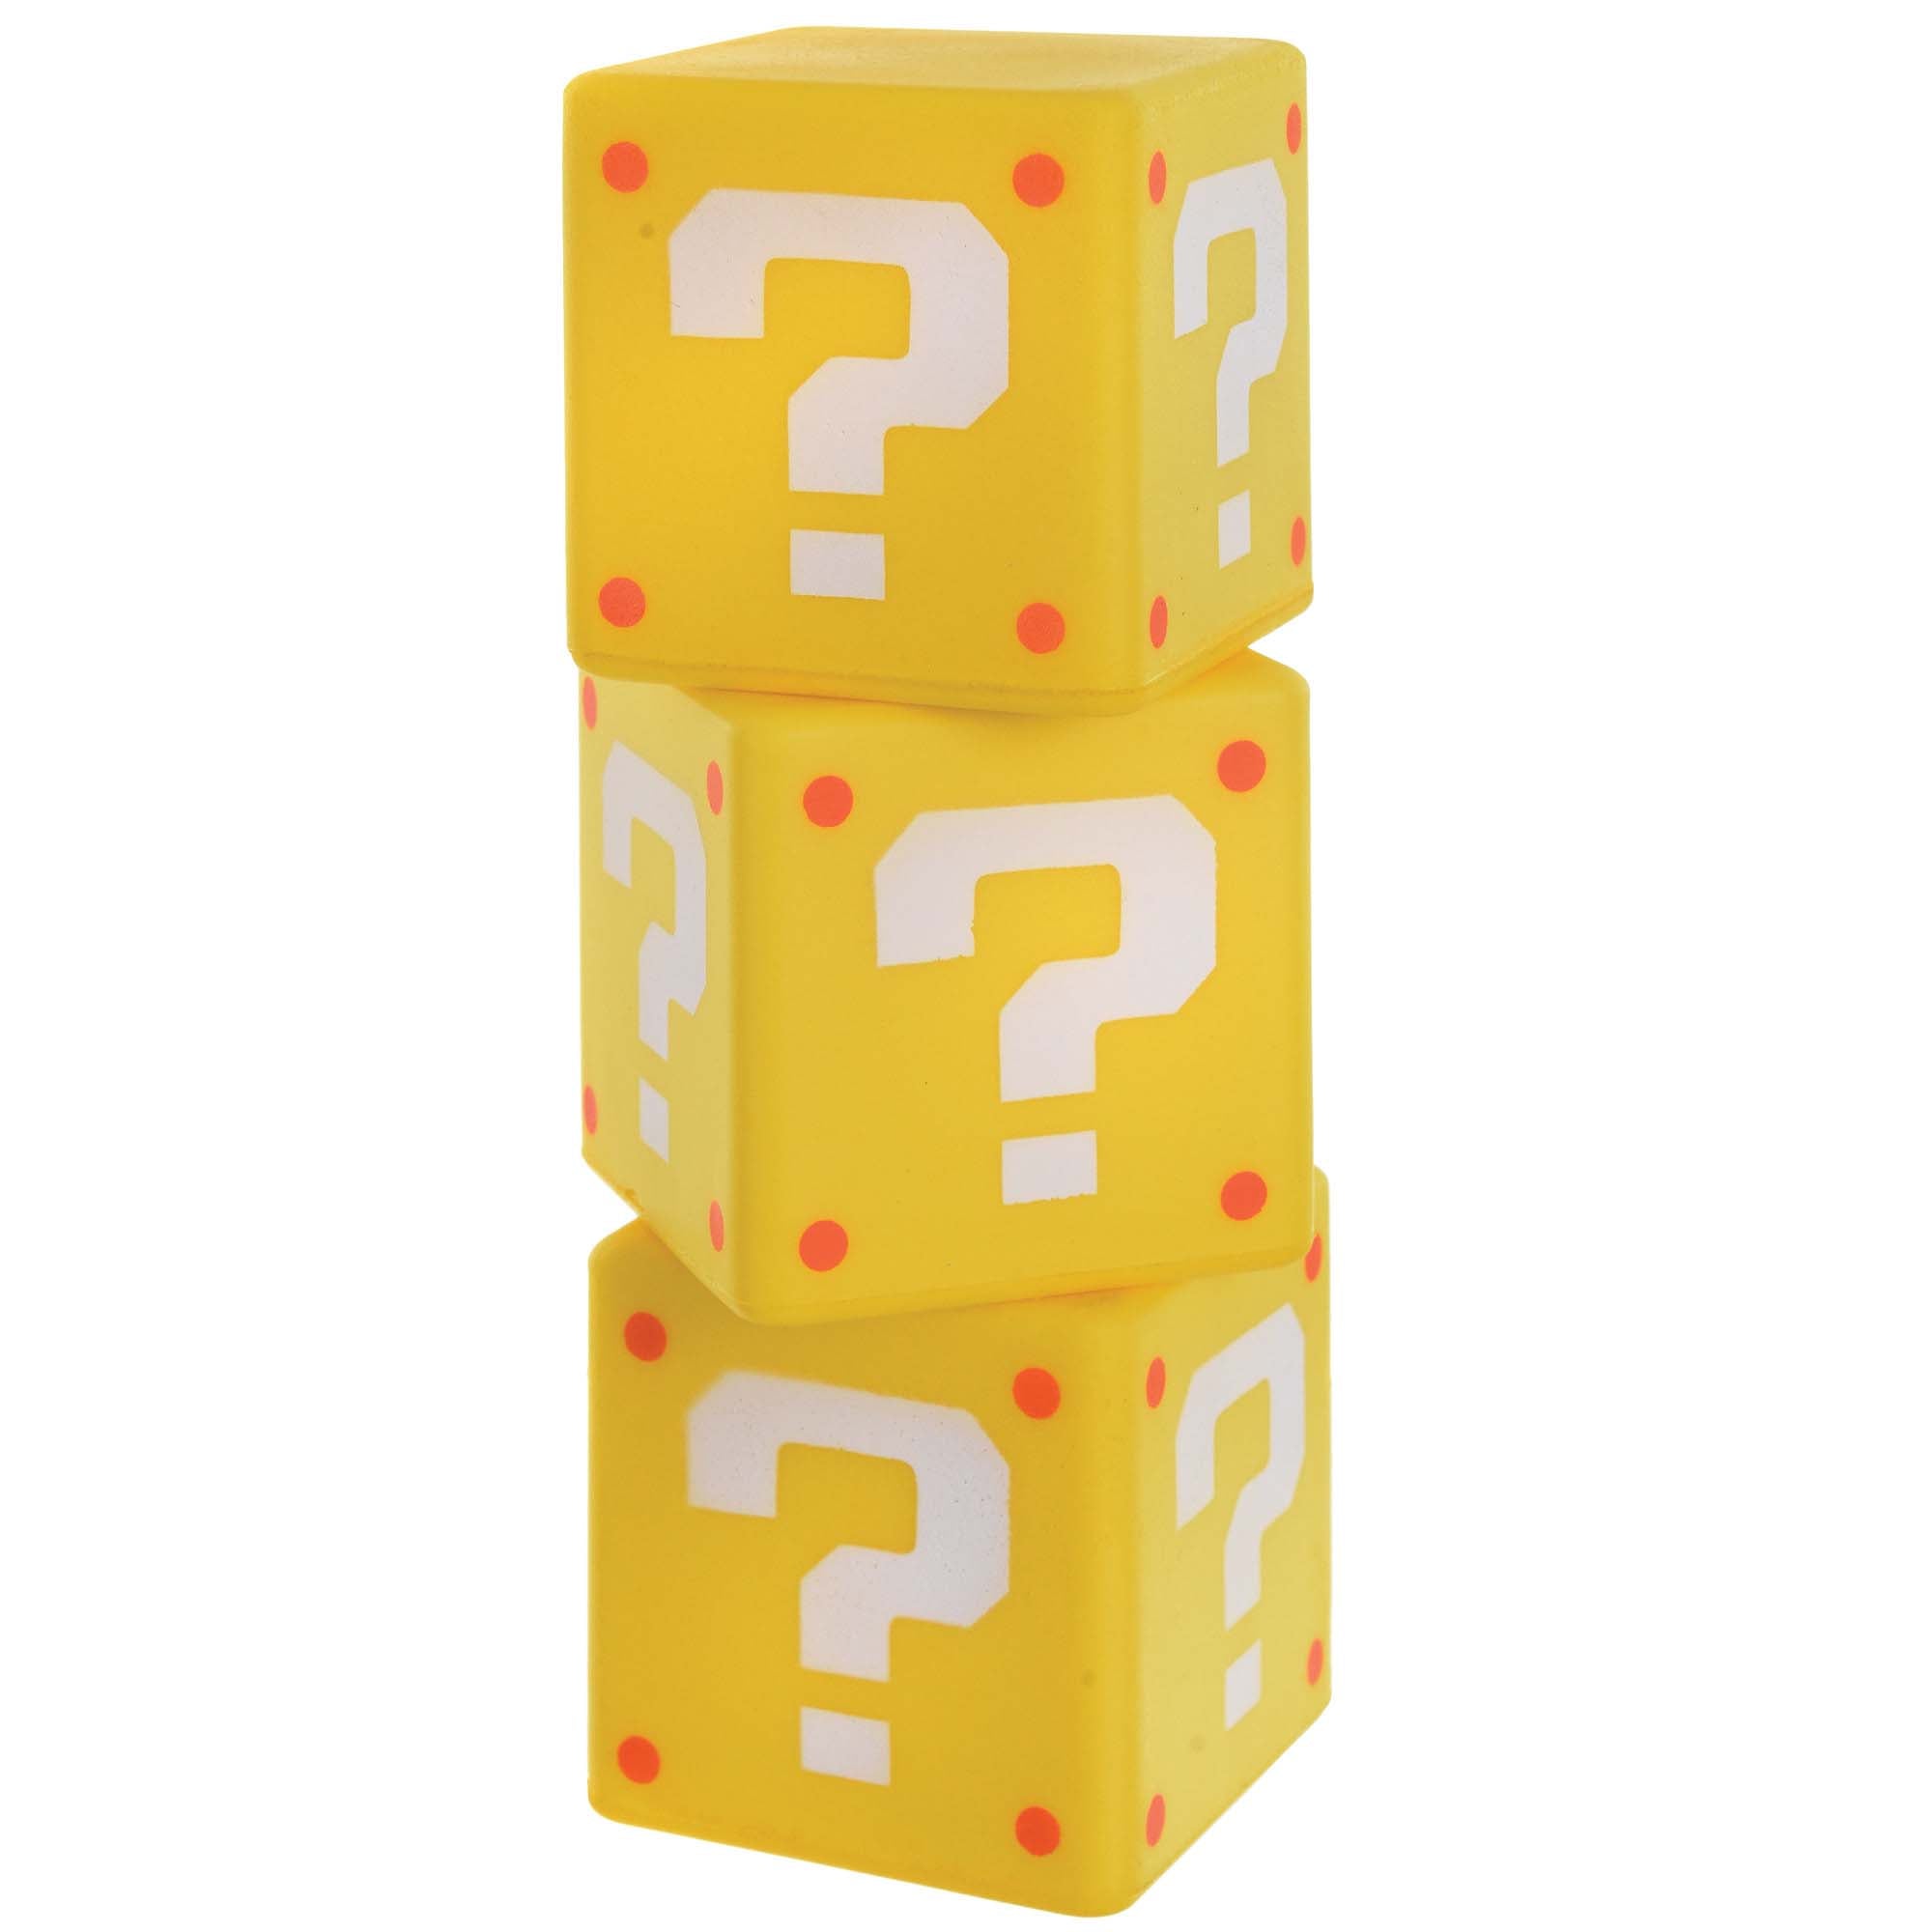 Super Mario Bros Foam Party Favour Mystery Blocks, 8 Count